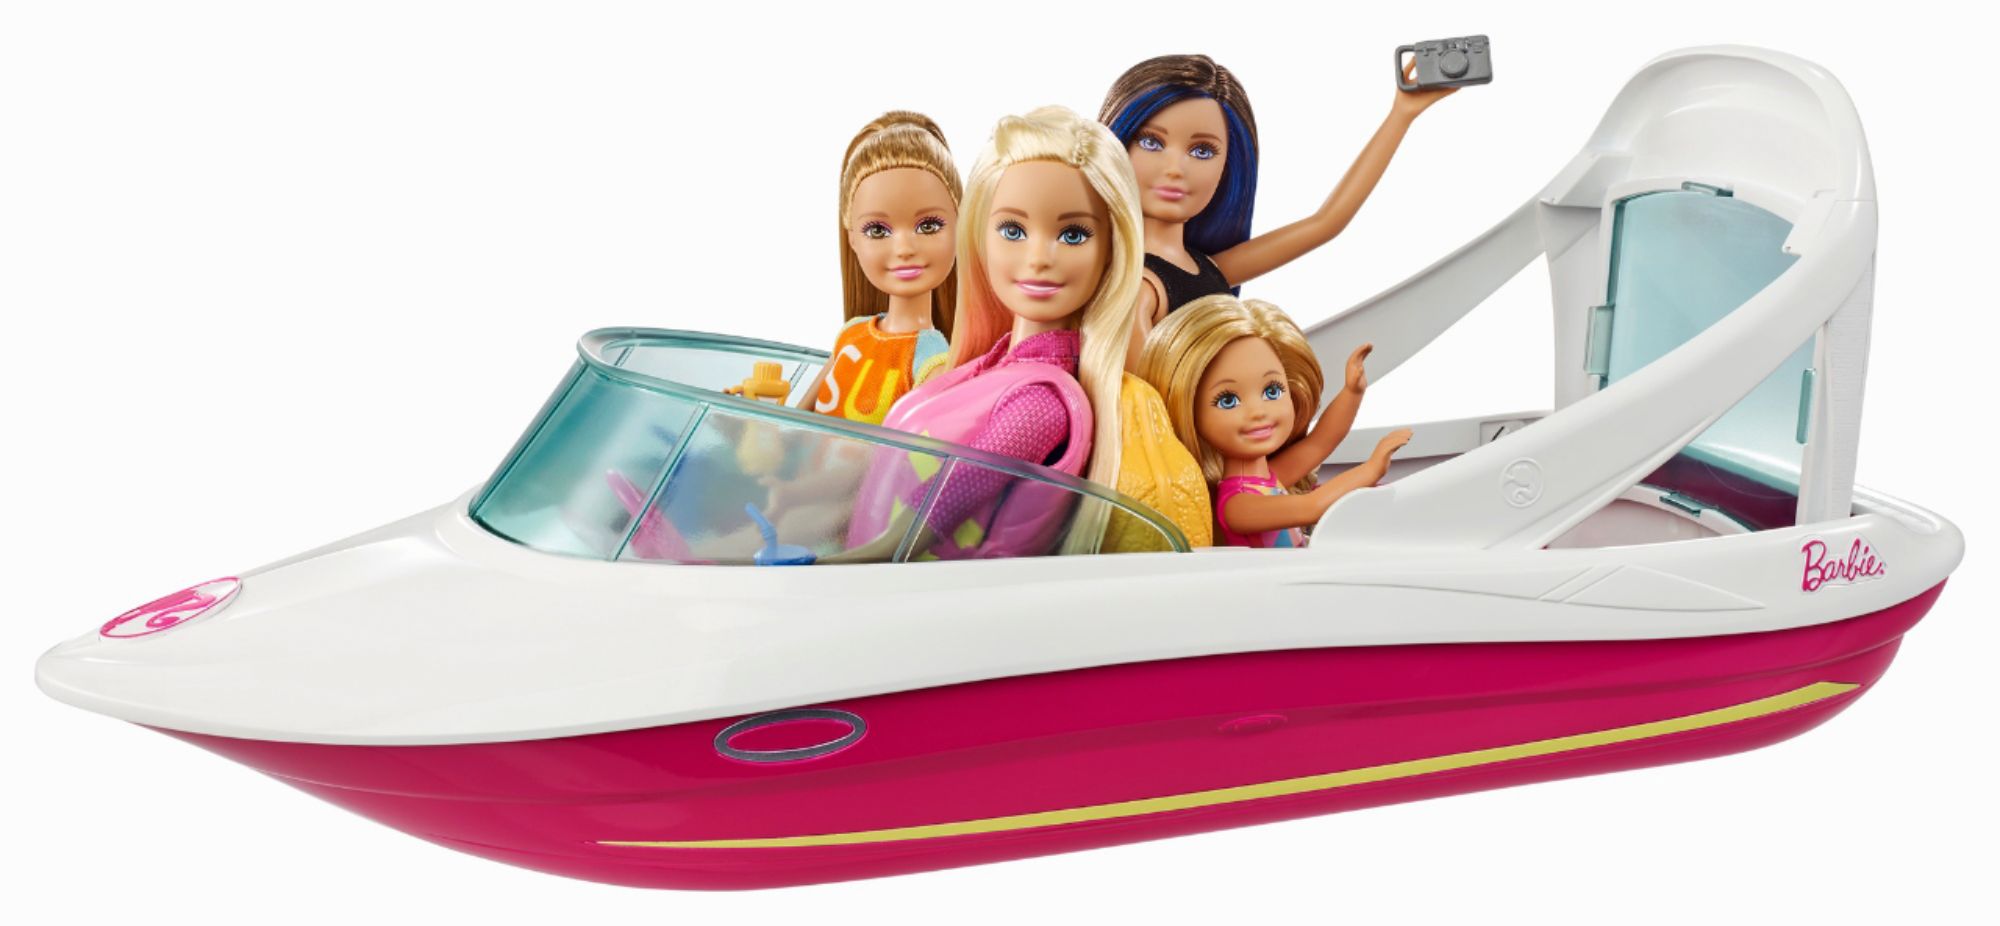 barbie dolphin magic ocean view boat & doll giftset